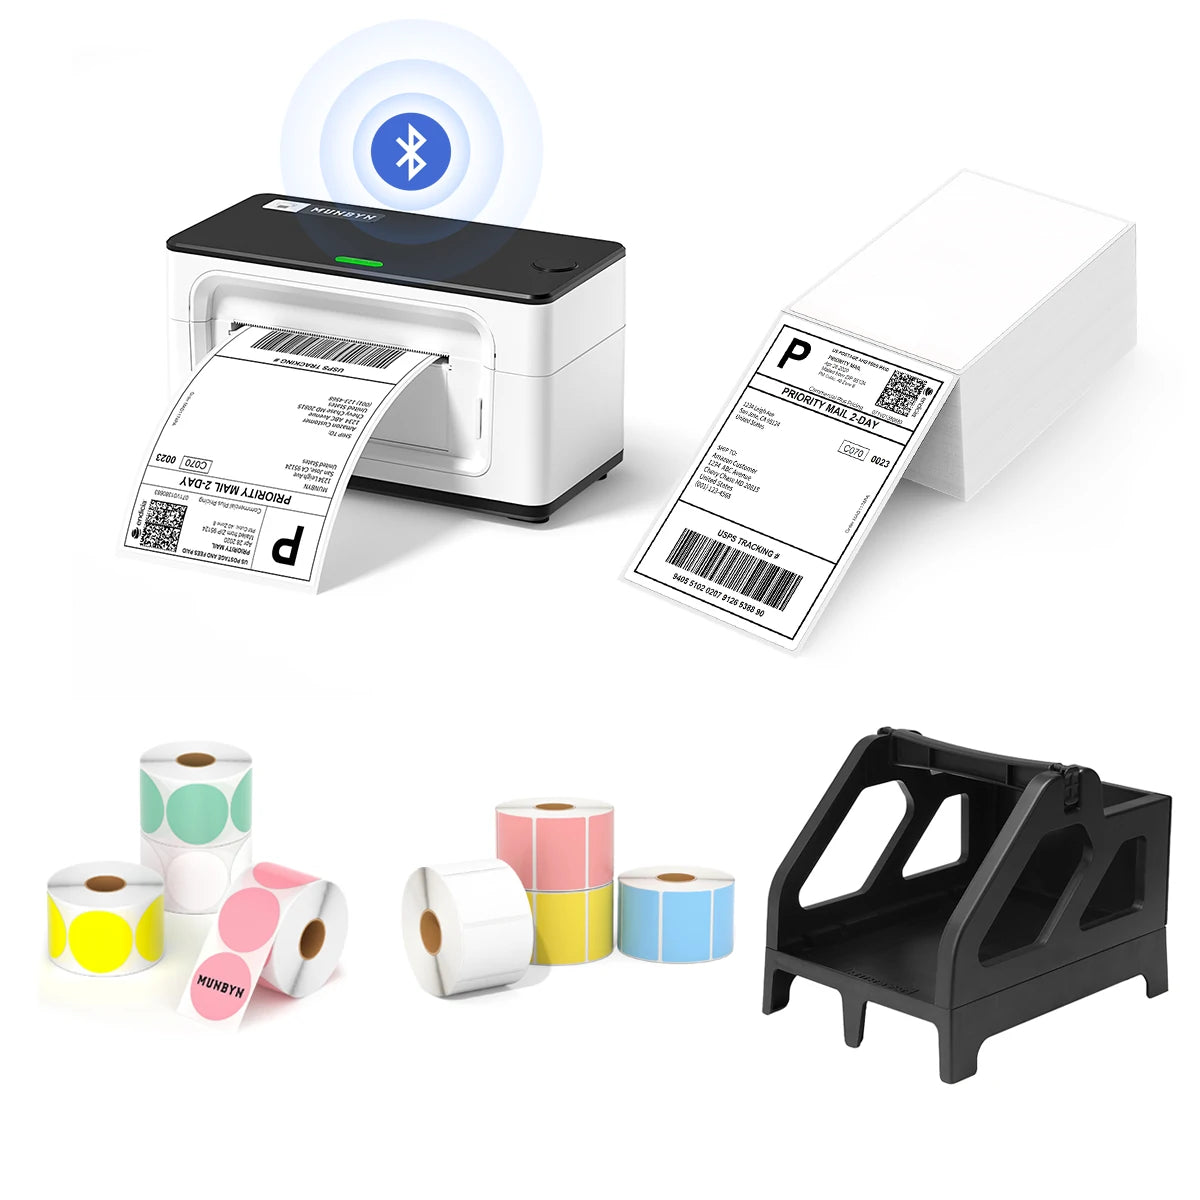 MUNBYN P941B white printer kit includes a label printer, a balck label holder, eight rolls of coloured labels and a stack of shipping labels.